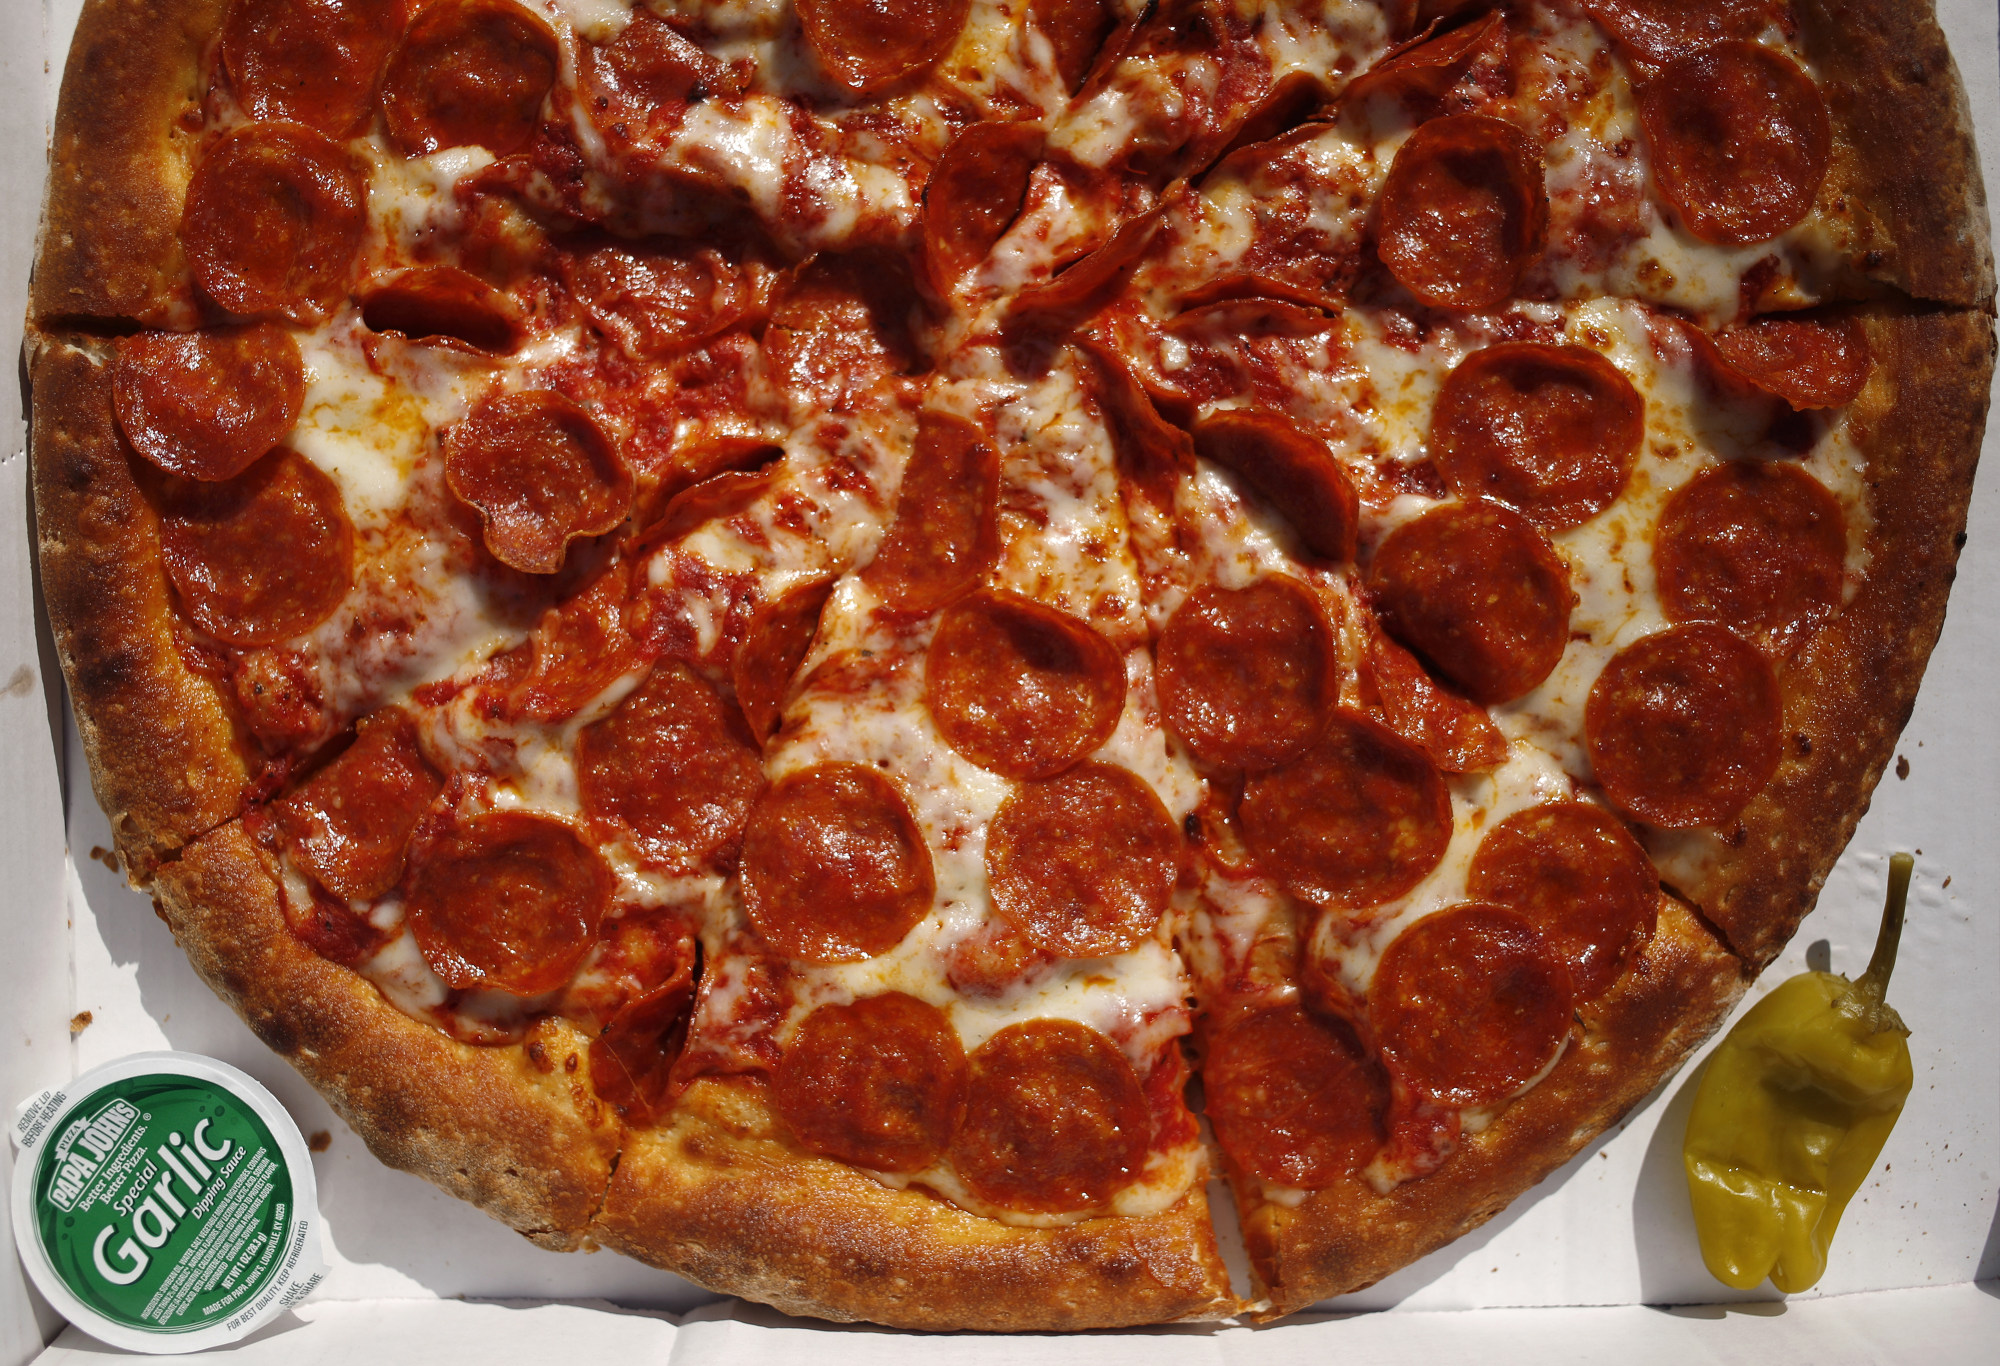 Papa Johns Is Rolling Out New York Style Pizza For The First Time Ever